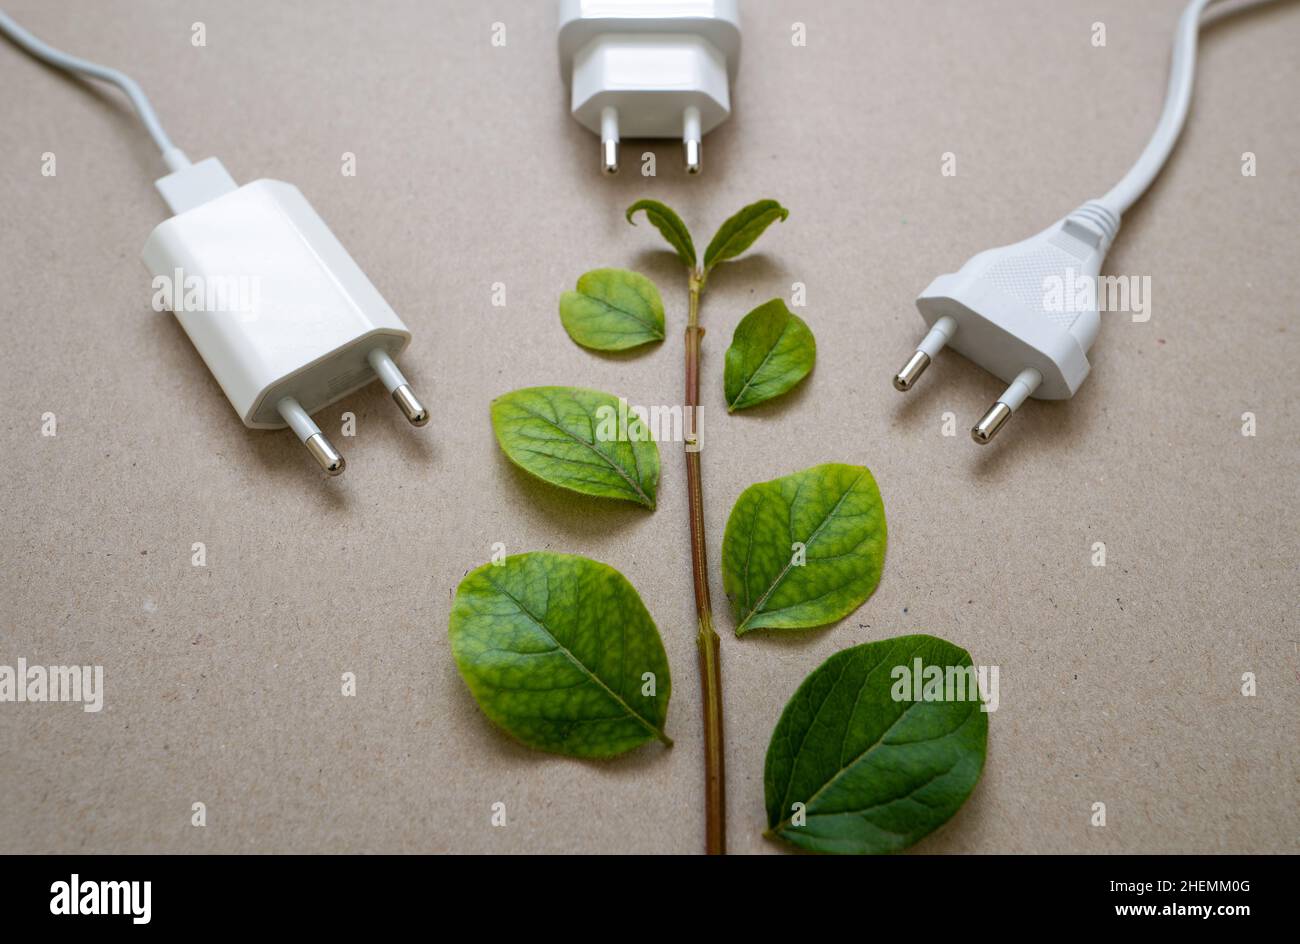 Close up photo of multiple unplugged charging sockets and green leaves. Concept of energy saving and reduce electricity usage. Stock Photo